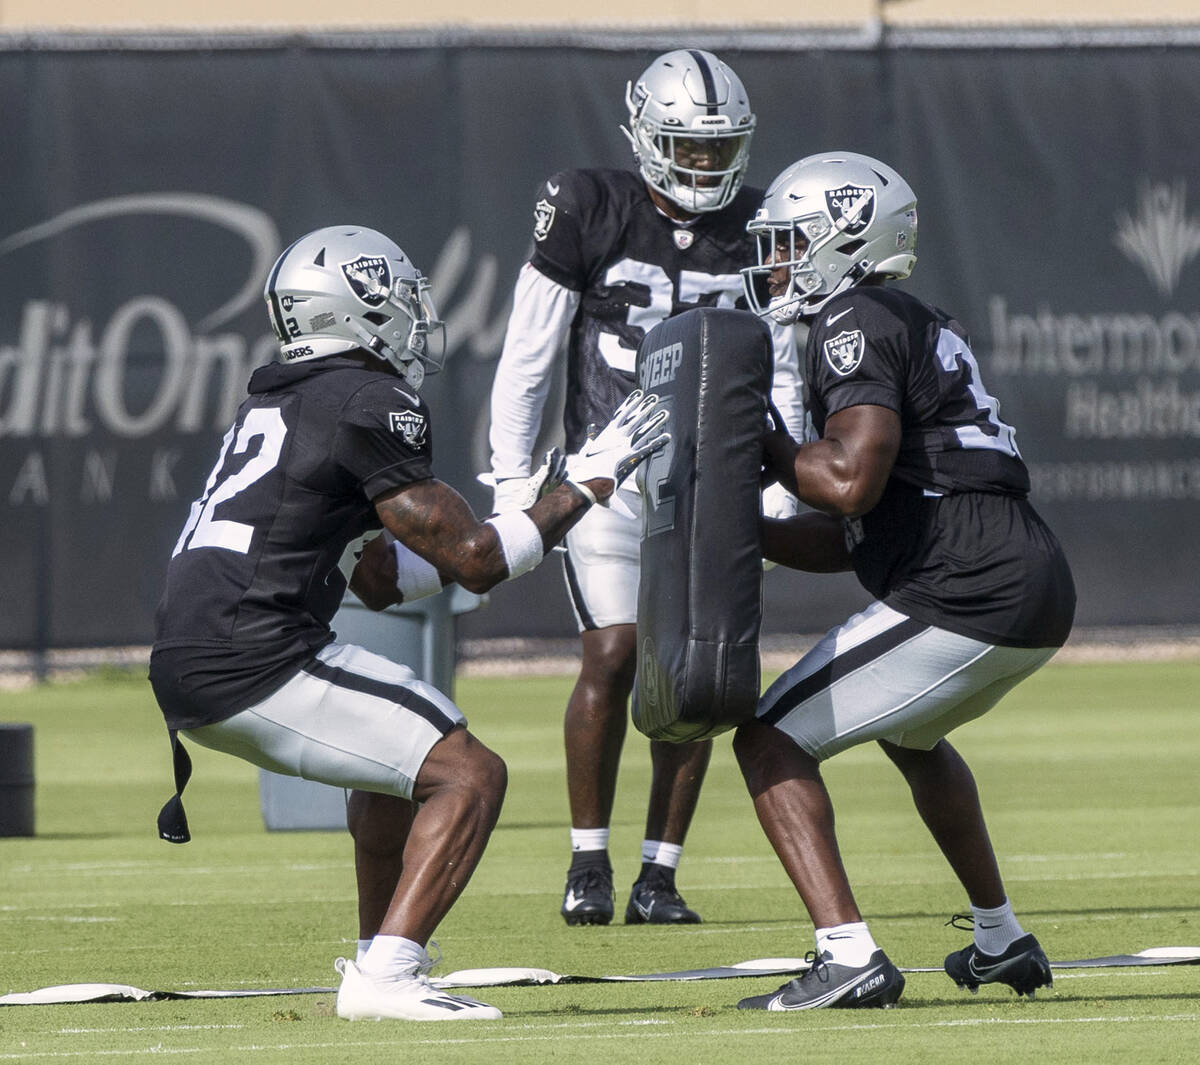 Raiders safeties Qwynnterrio Cole (42) and Duron Harmon (30) drill as Tyree Gillespie (37) look ...